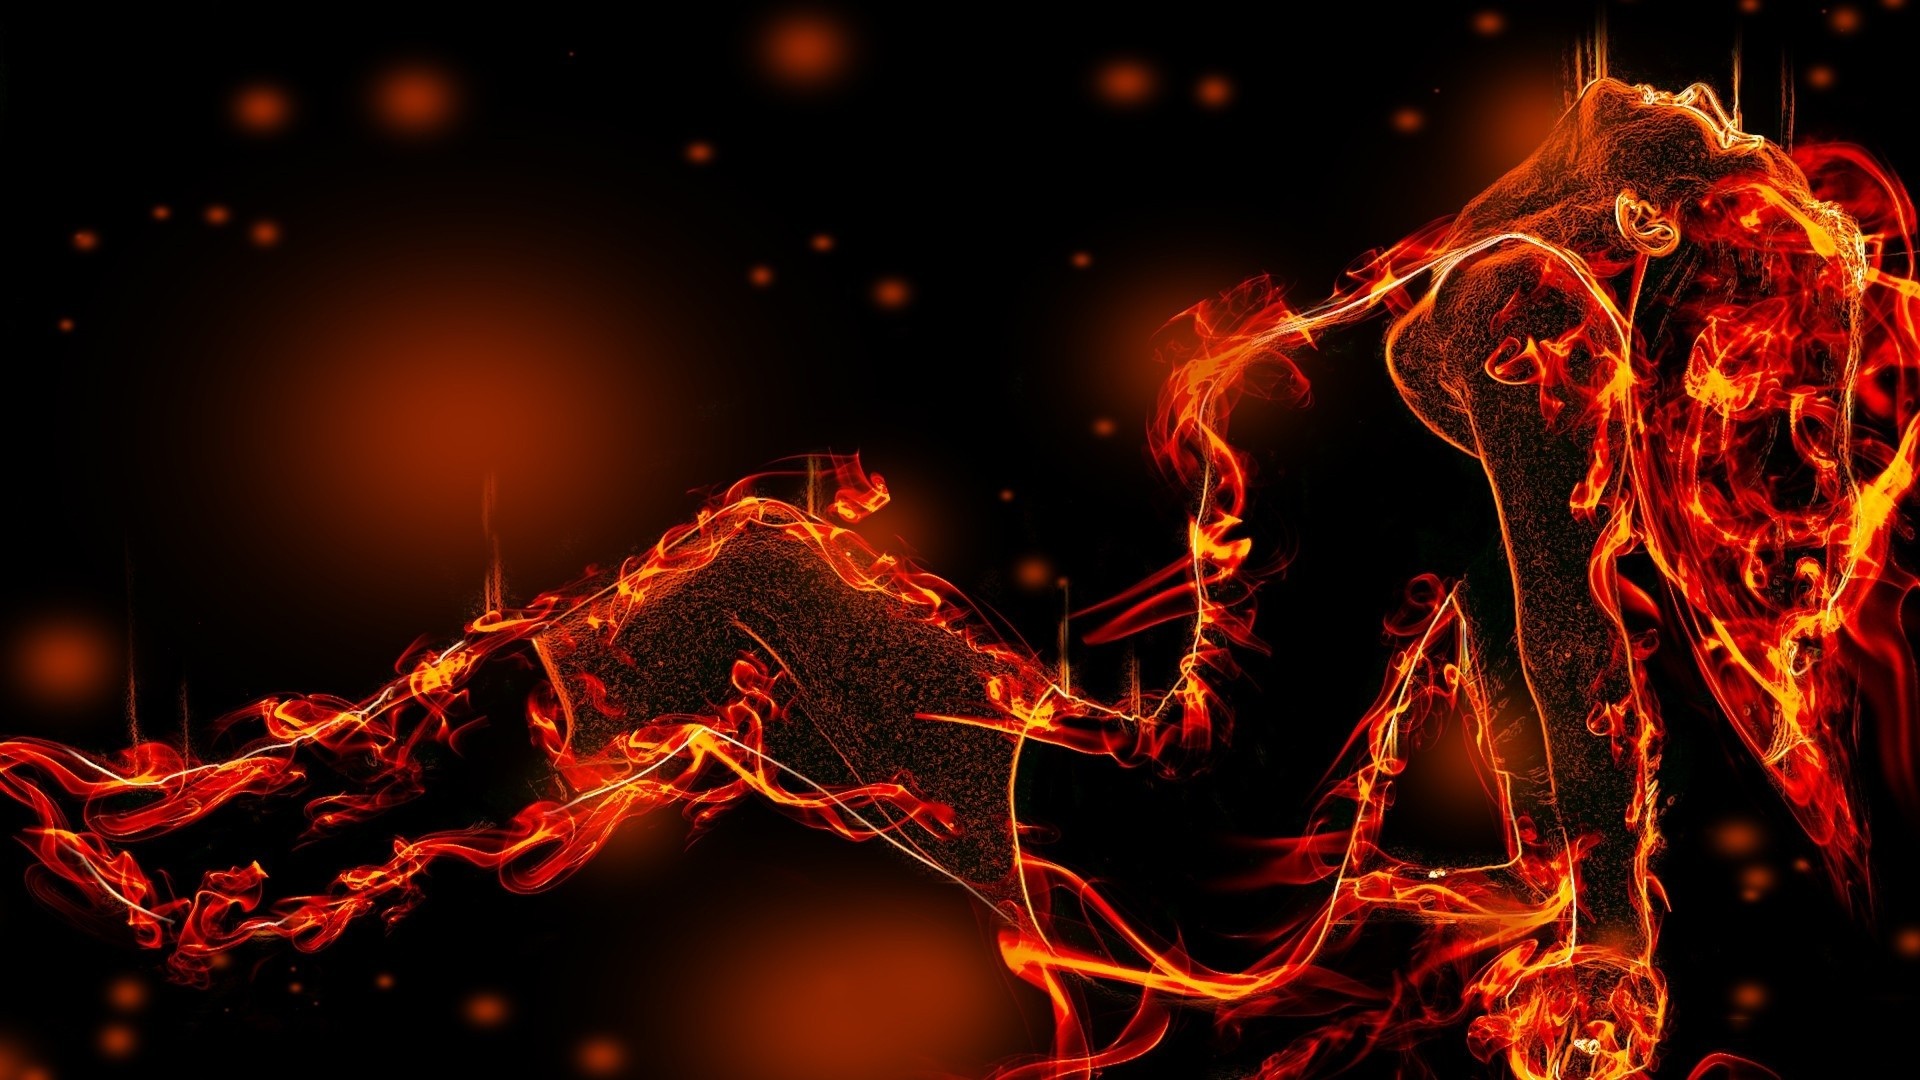 1920x1080 ... Awesome Fire Backgrounds Wallpaper | 3D Wallpapers | Pinterest ...